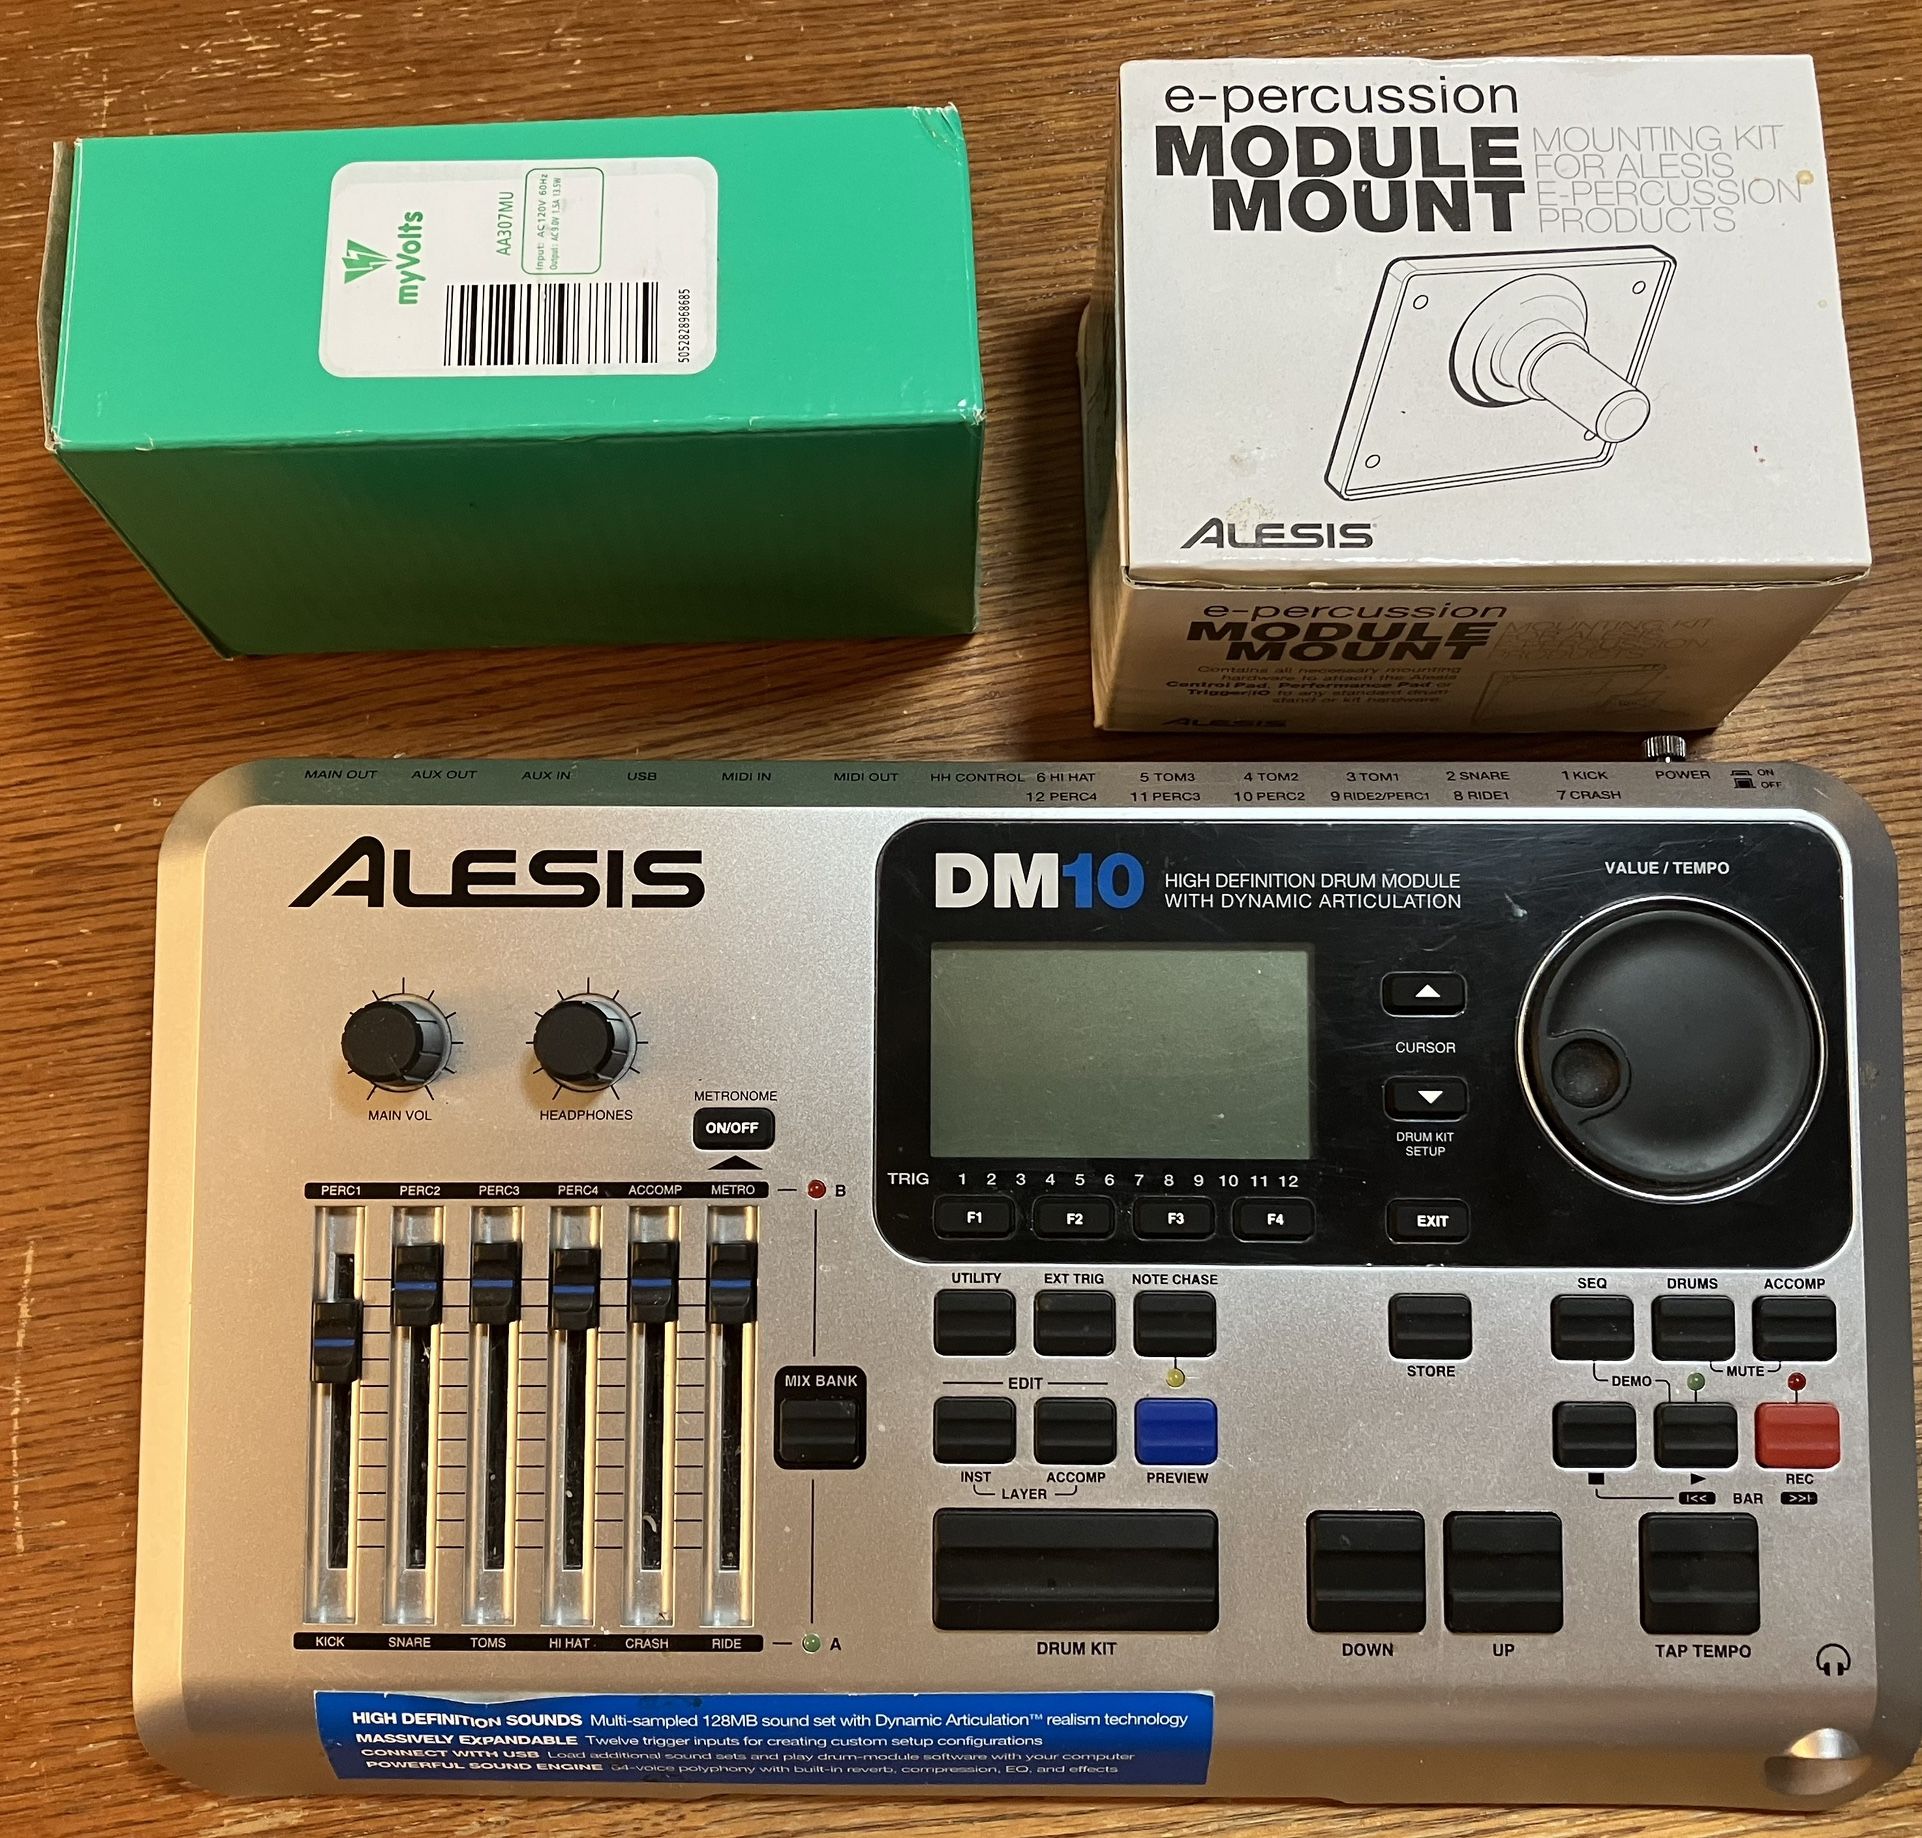 Alesis DM10 High Definition Drum Module with Dynamic Articulation. New Power Supply. New Module Mount. Excellent Shape.